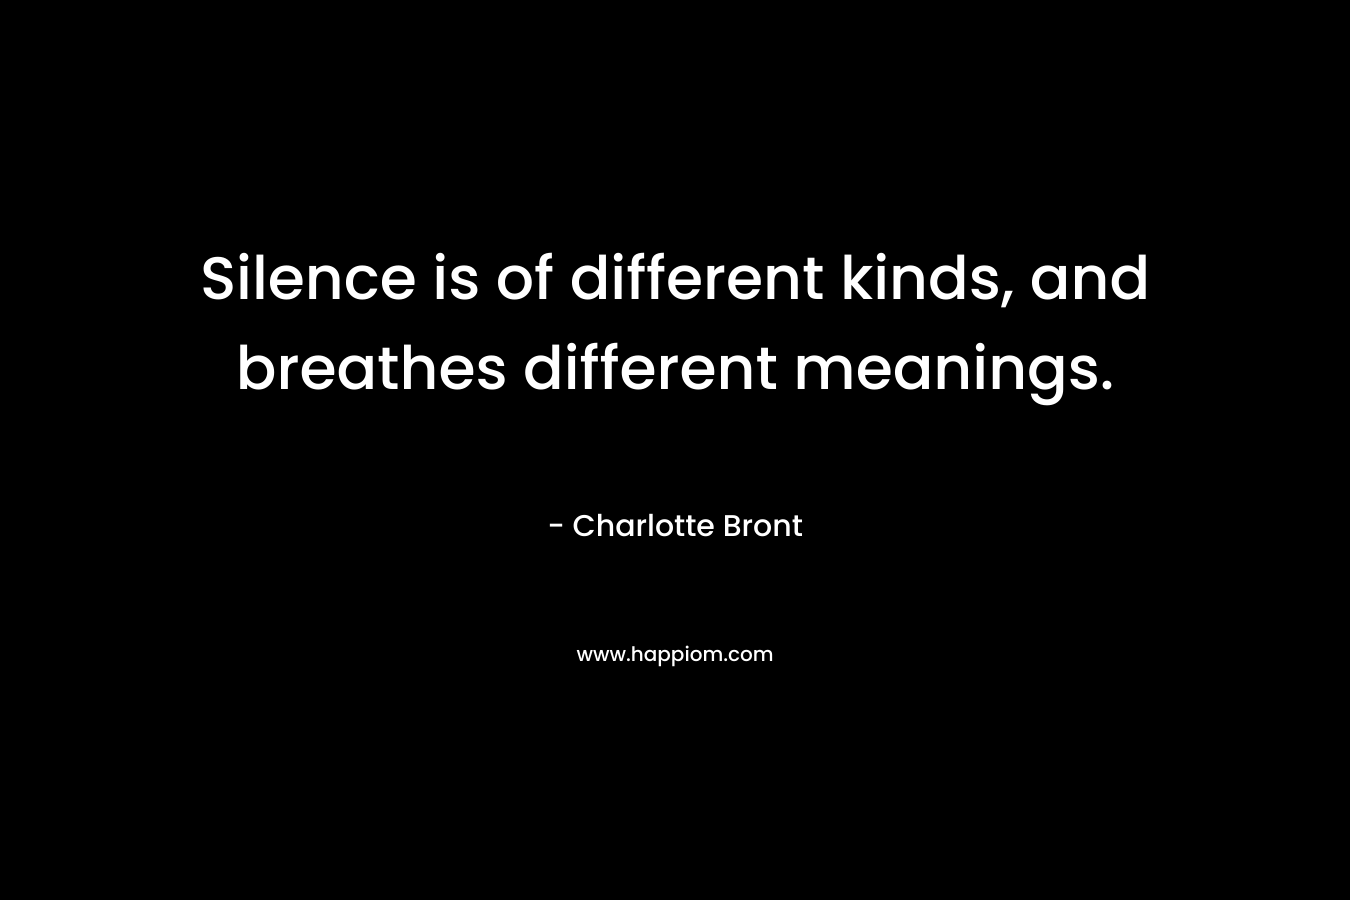 Silence is of different kinds, and breathes different meanings. – Charlotte Bront